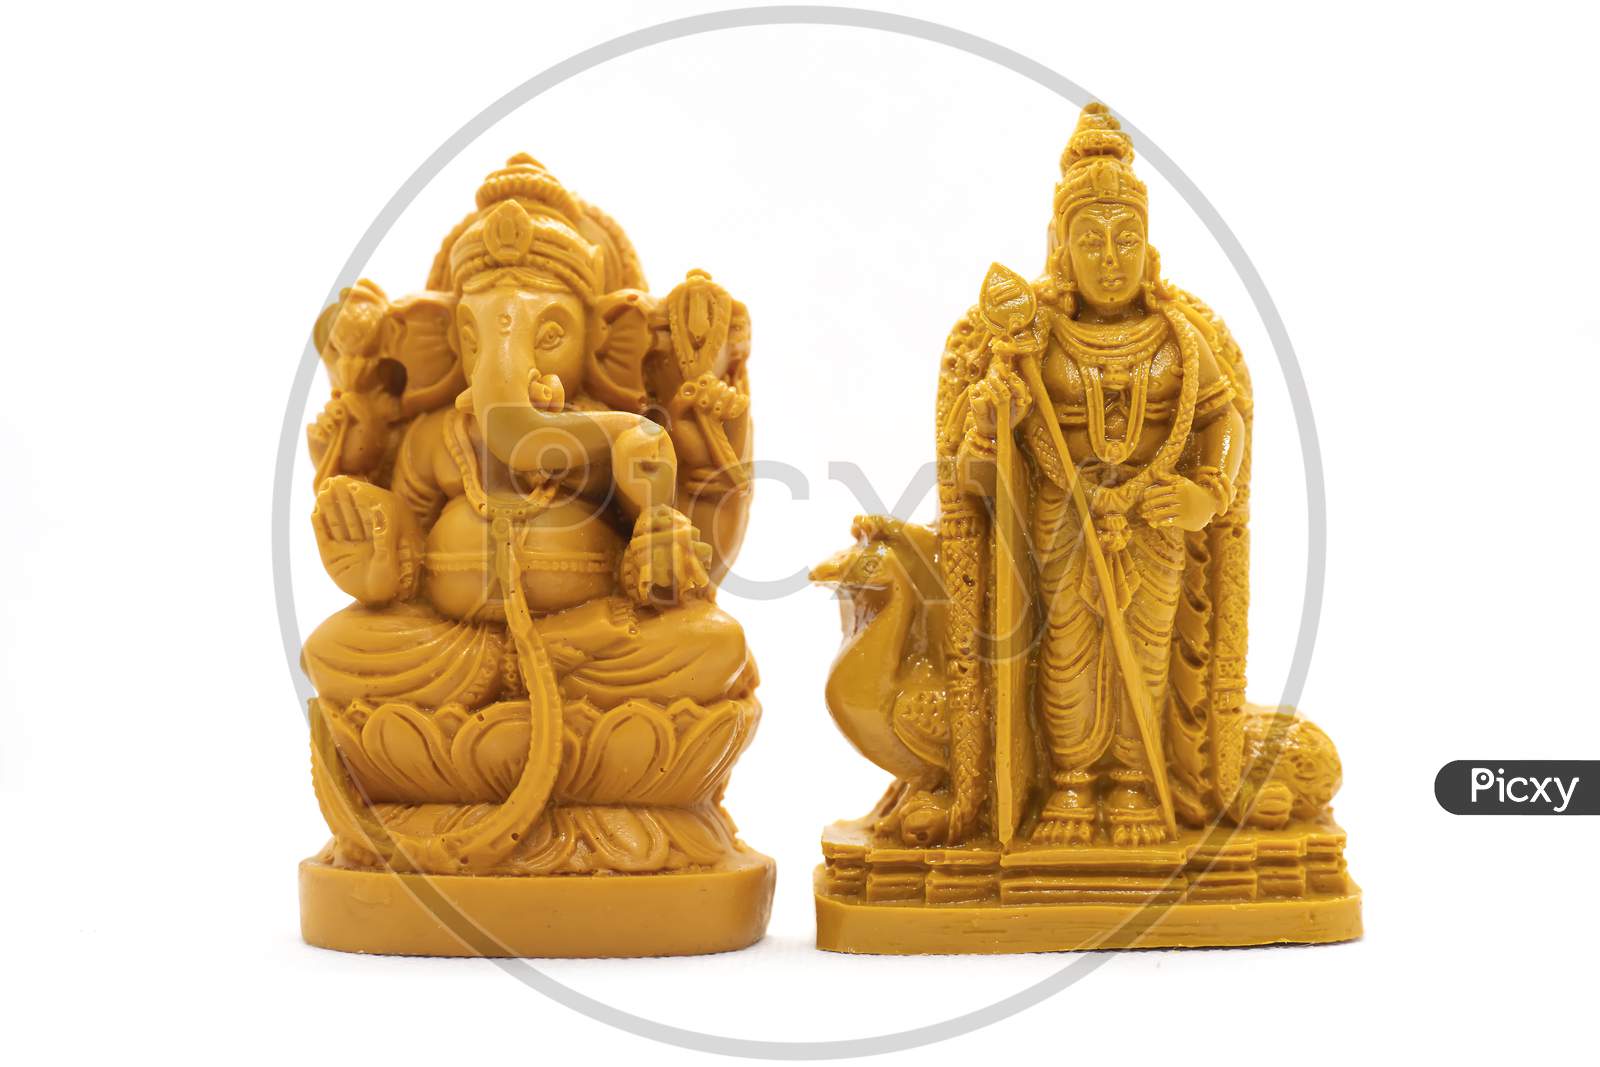 The Hand-Carved Wooden Idol Of Lord Murugan With Ganesha Is Isolated On A White Background